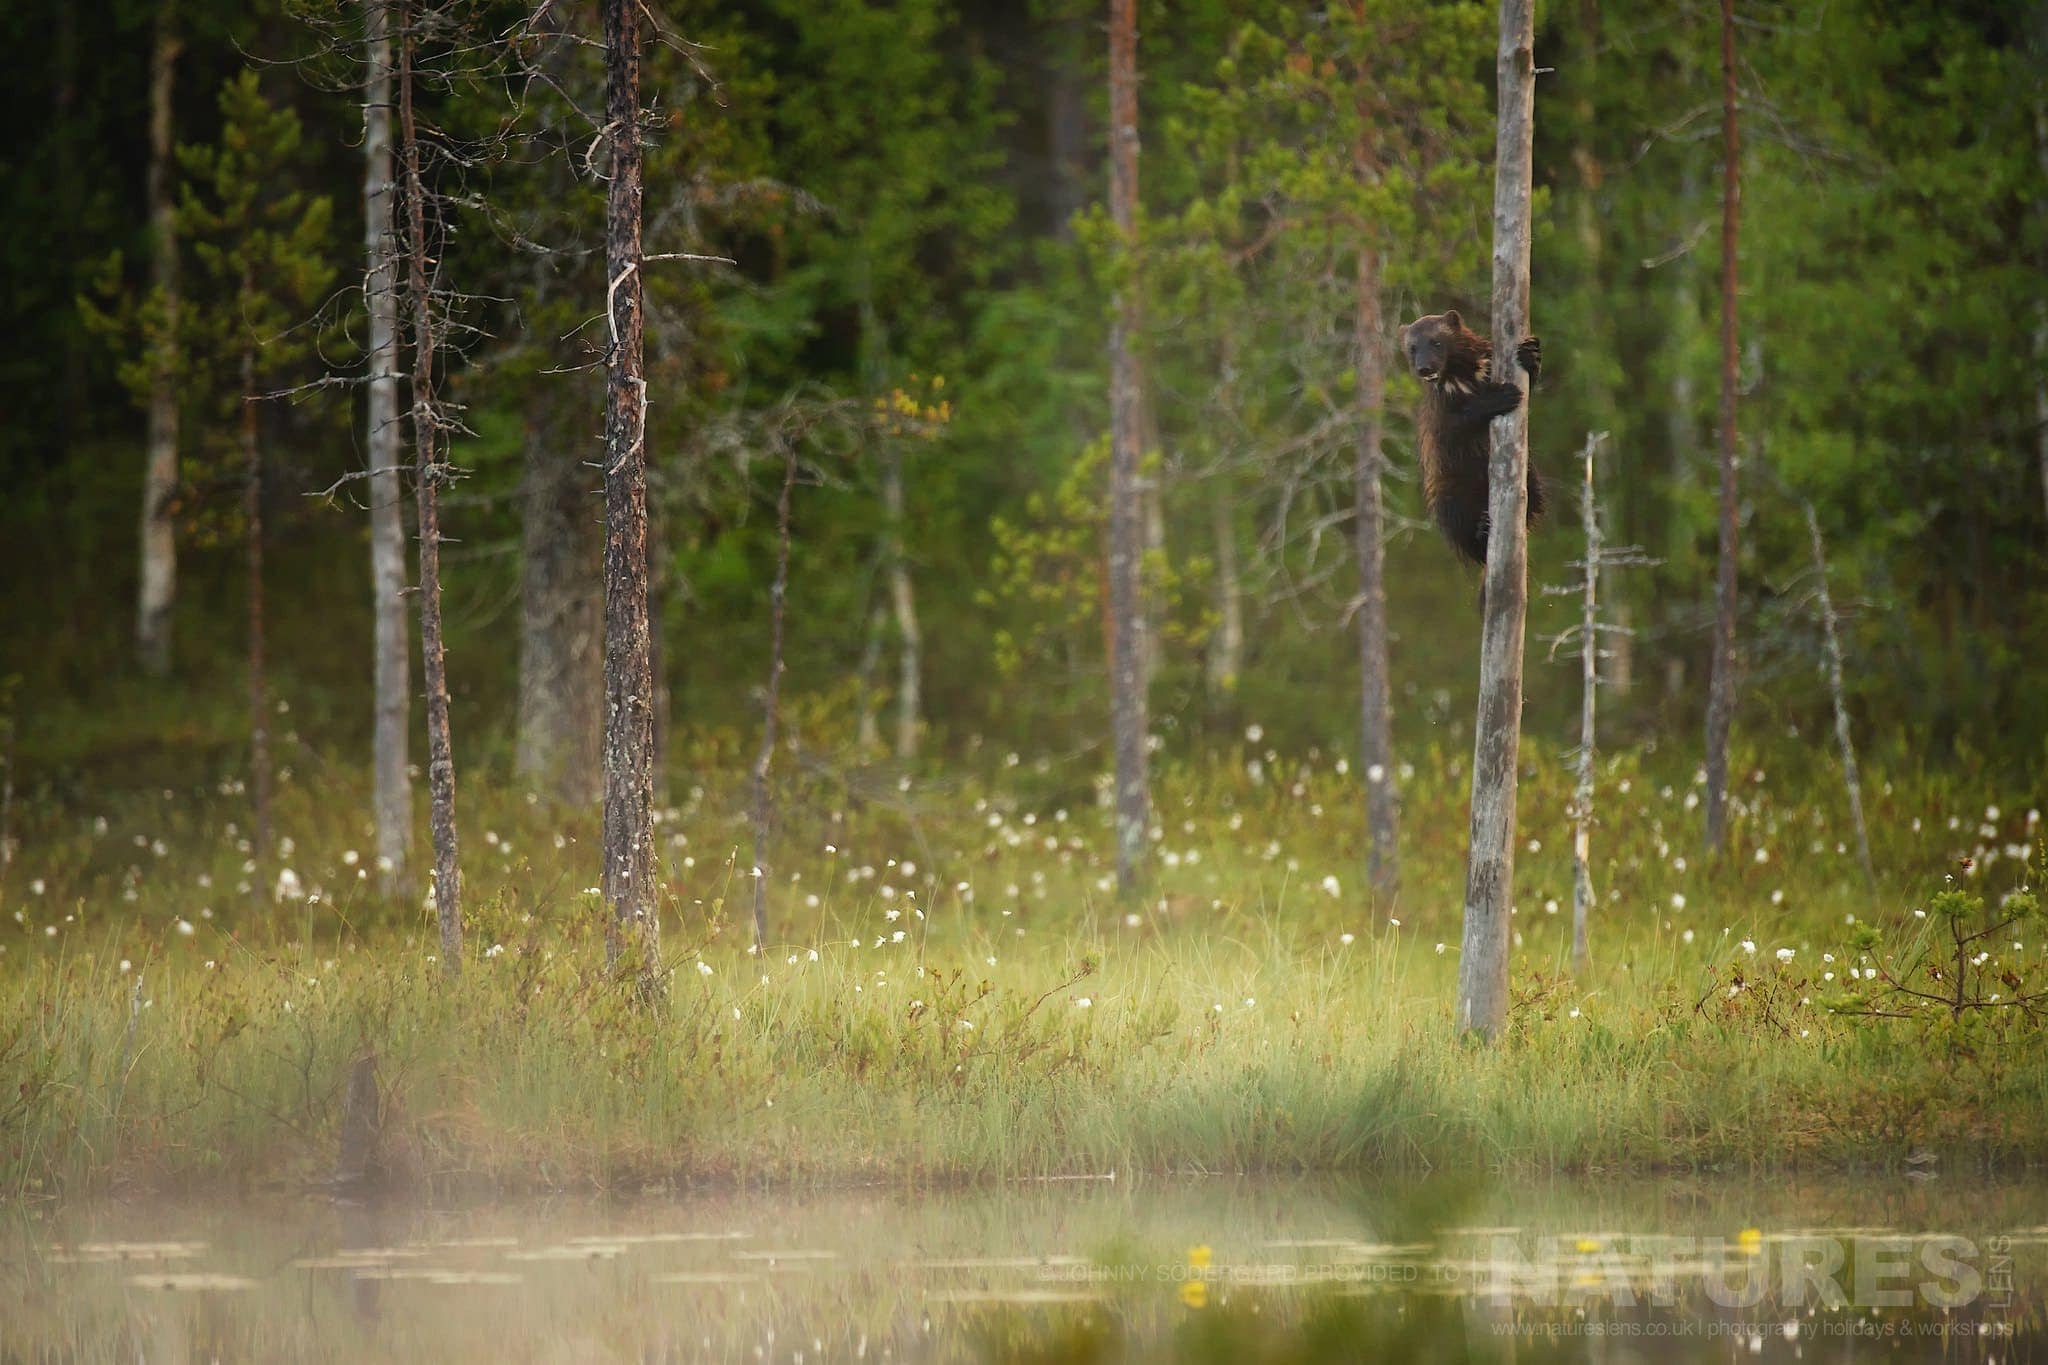 A Resident Wolverine Climbing A Tree Photographed By Johnny Södergård During The Natureslens Wild Brown Bears Of Finland Photography Holiday